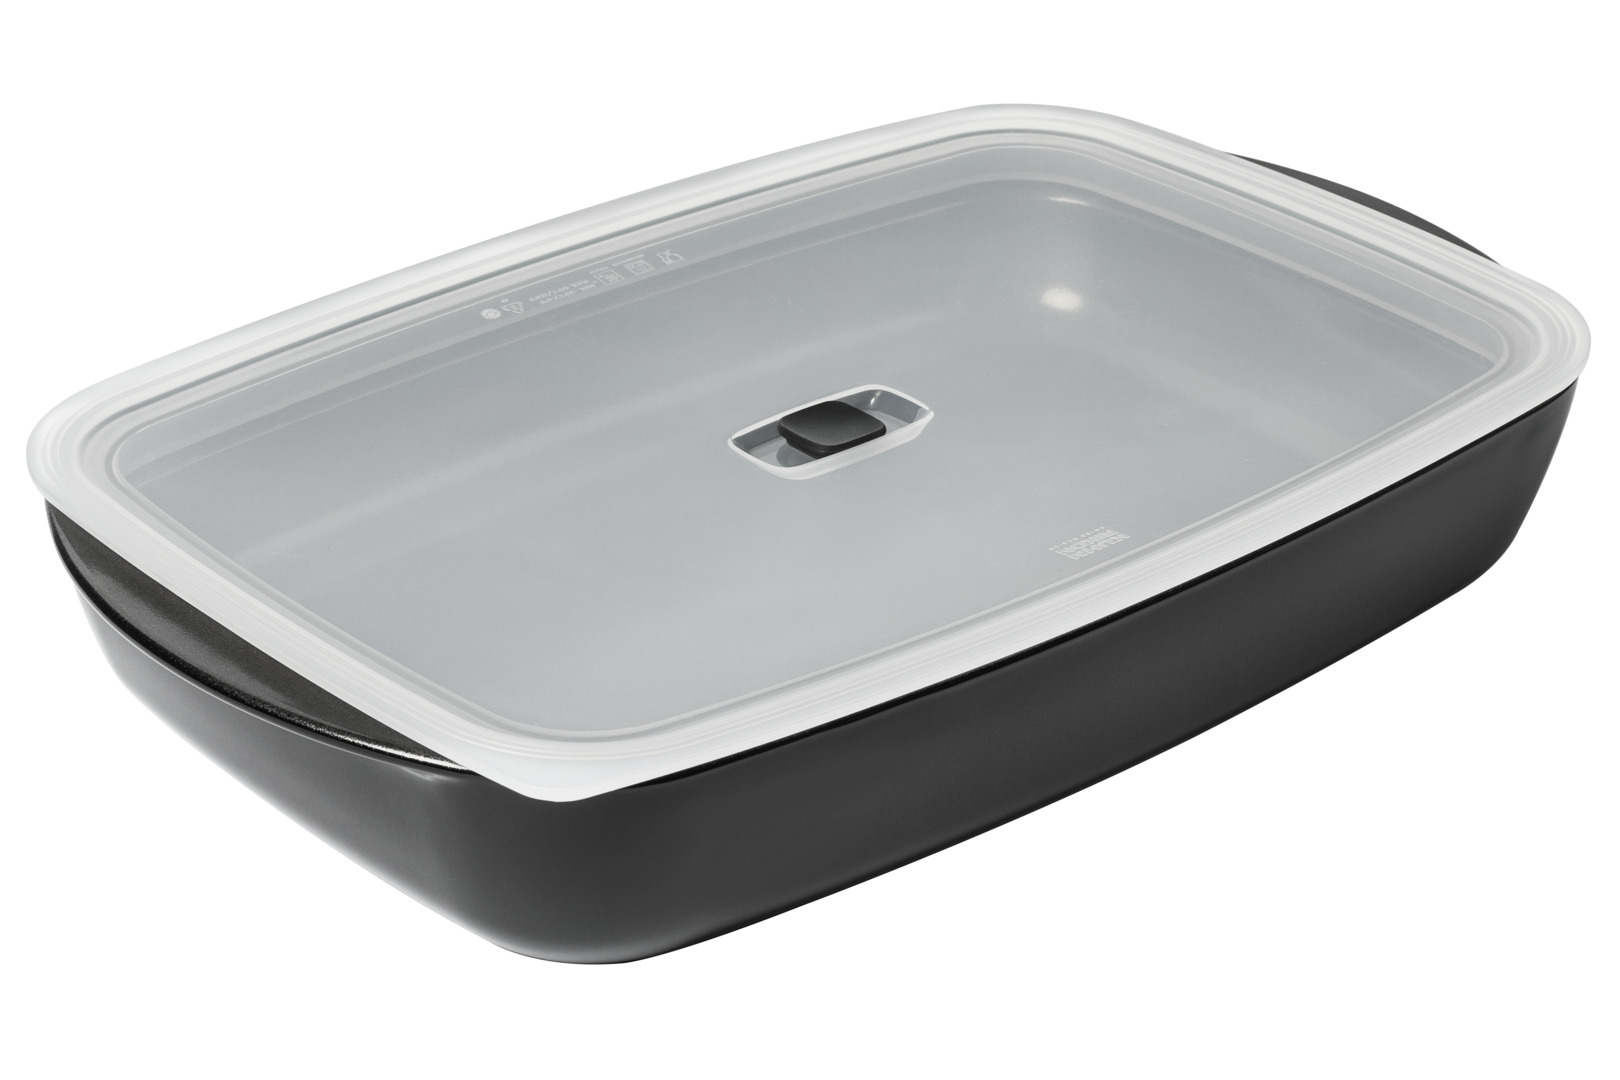 Kuhn Rikon - EASY GLASS Dish non-stick coated with Lid 3.6L / Large